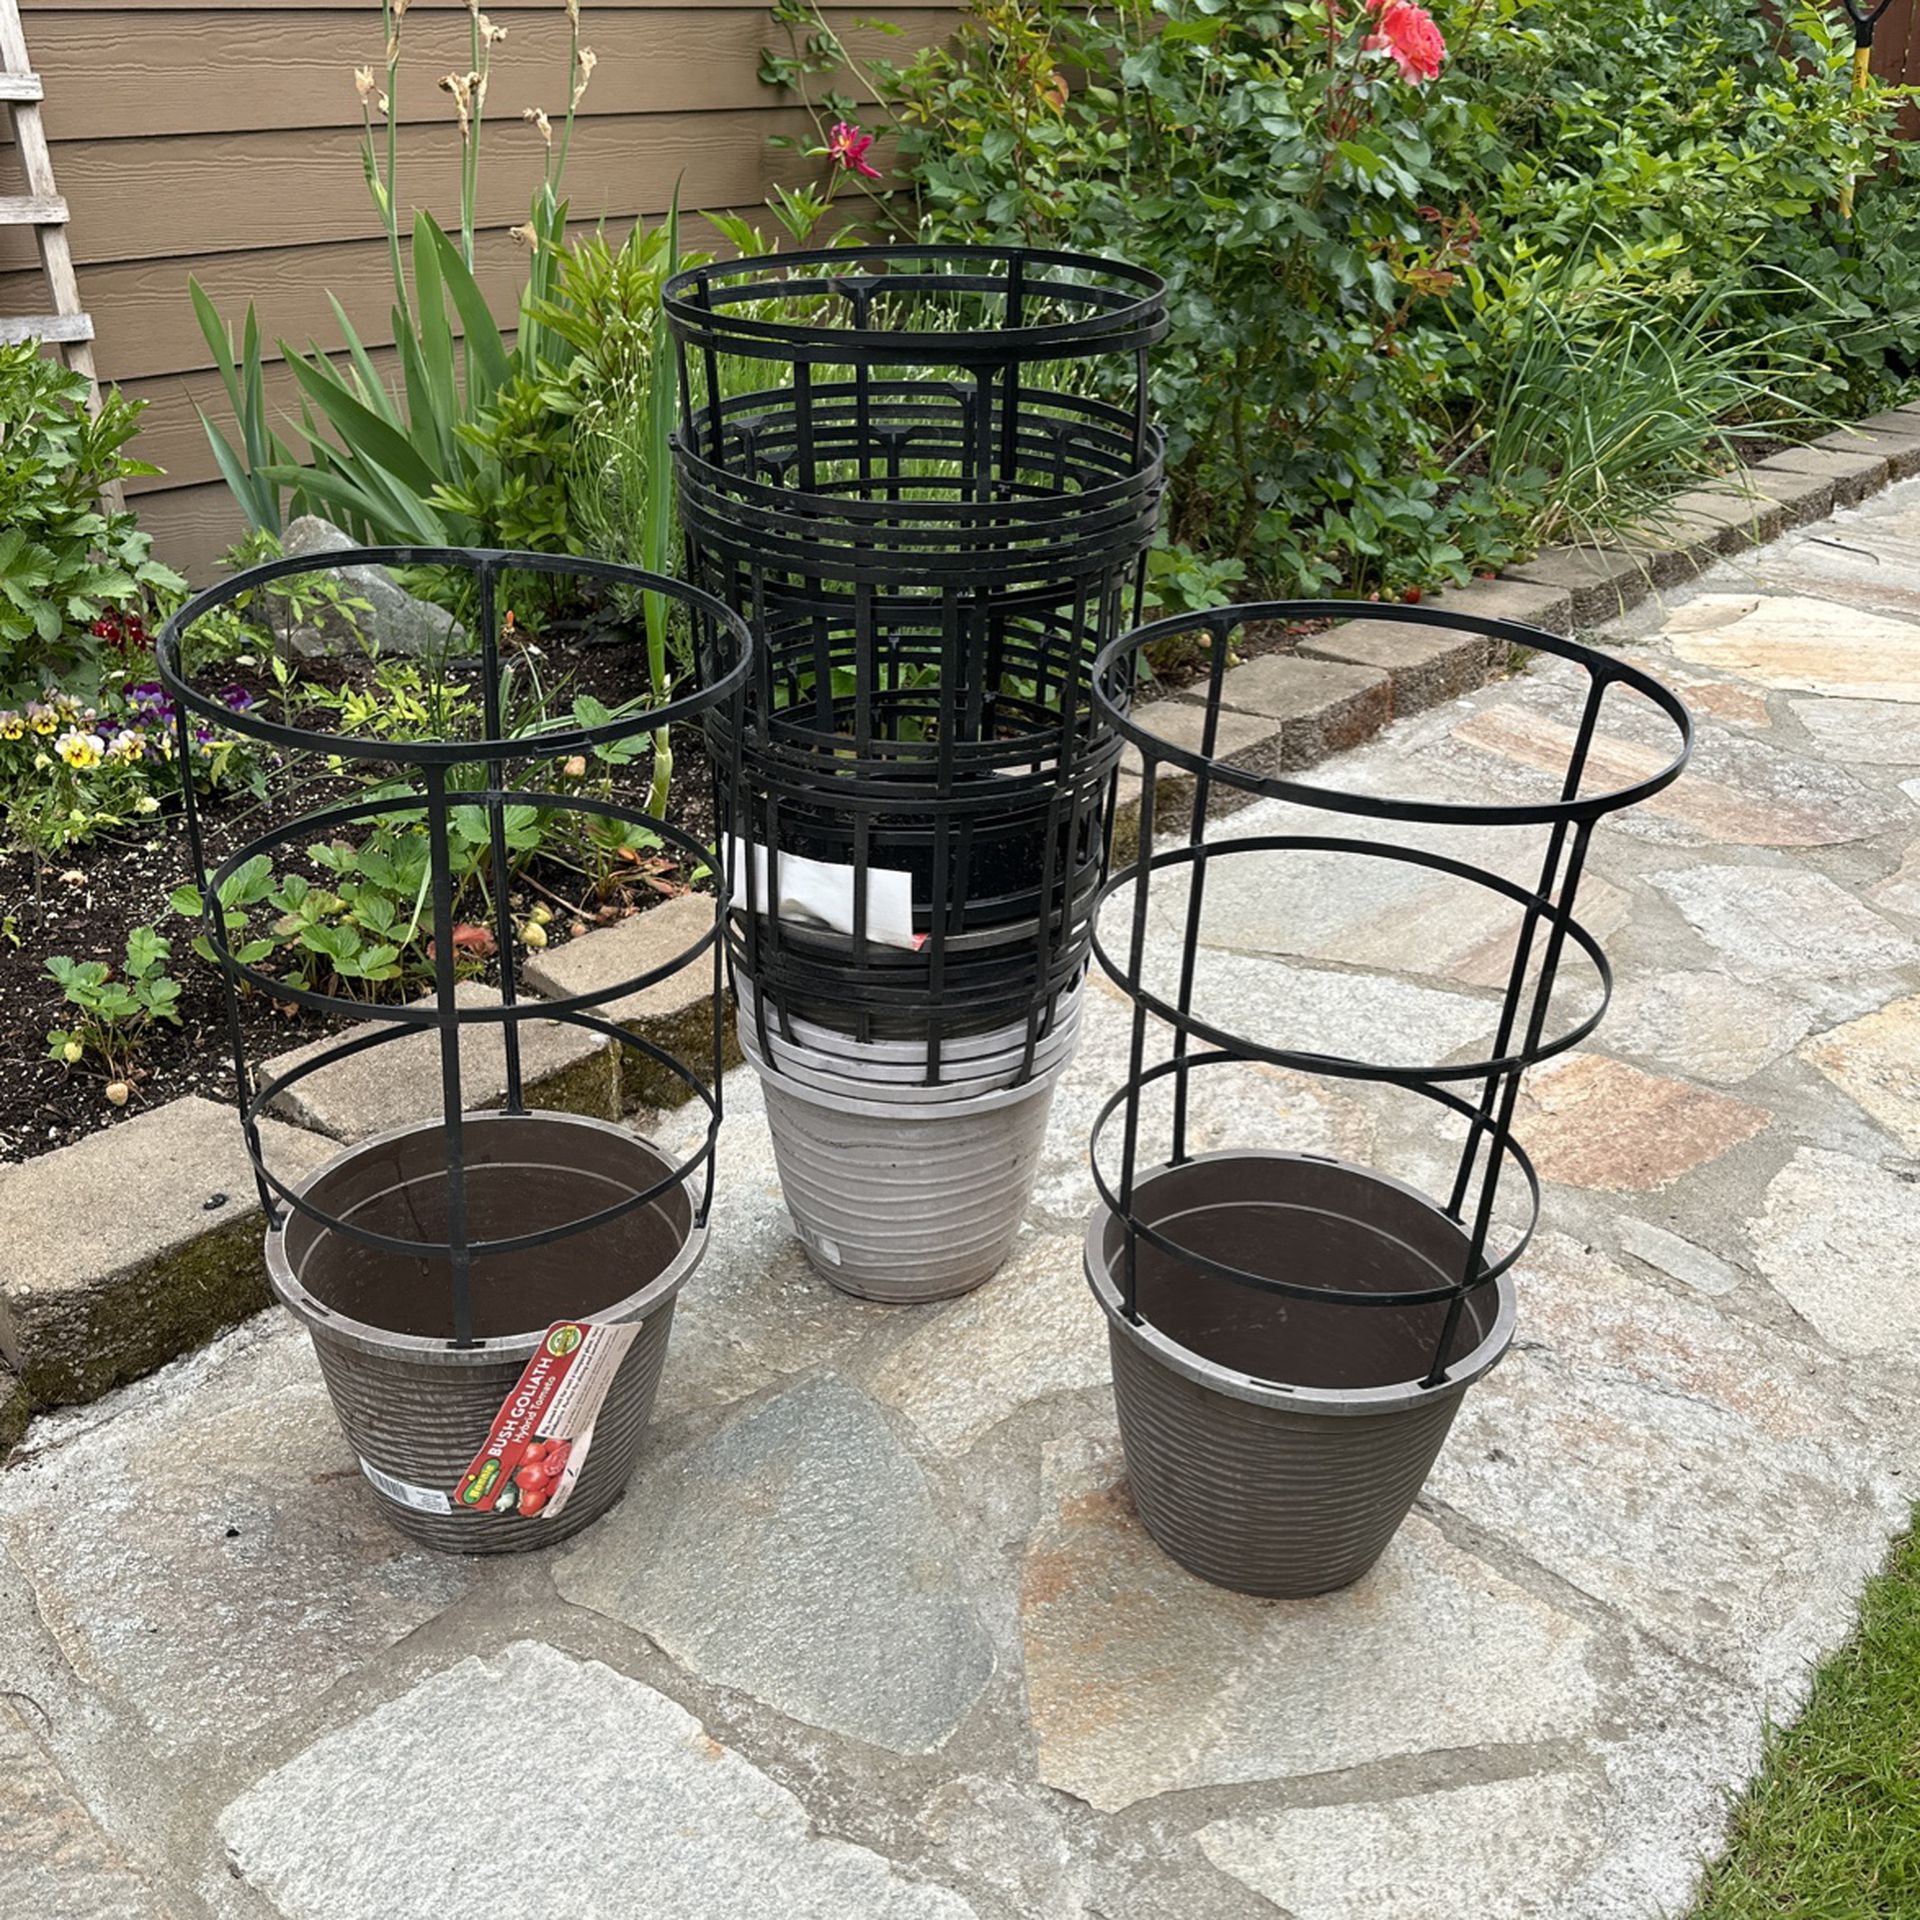 Pots  For Vegetables And Flowers $5 each